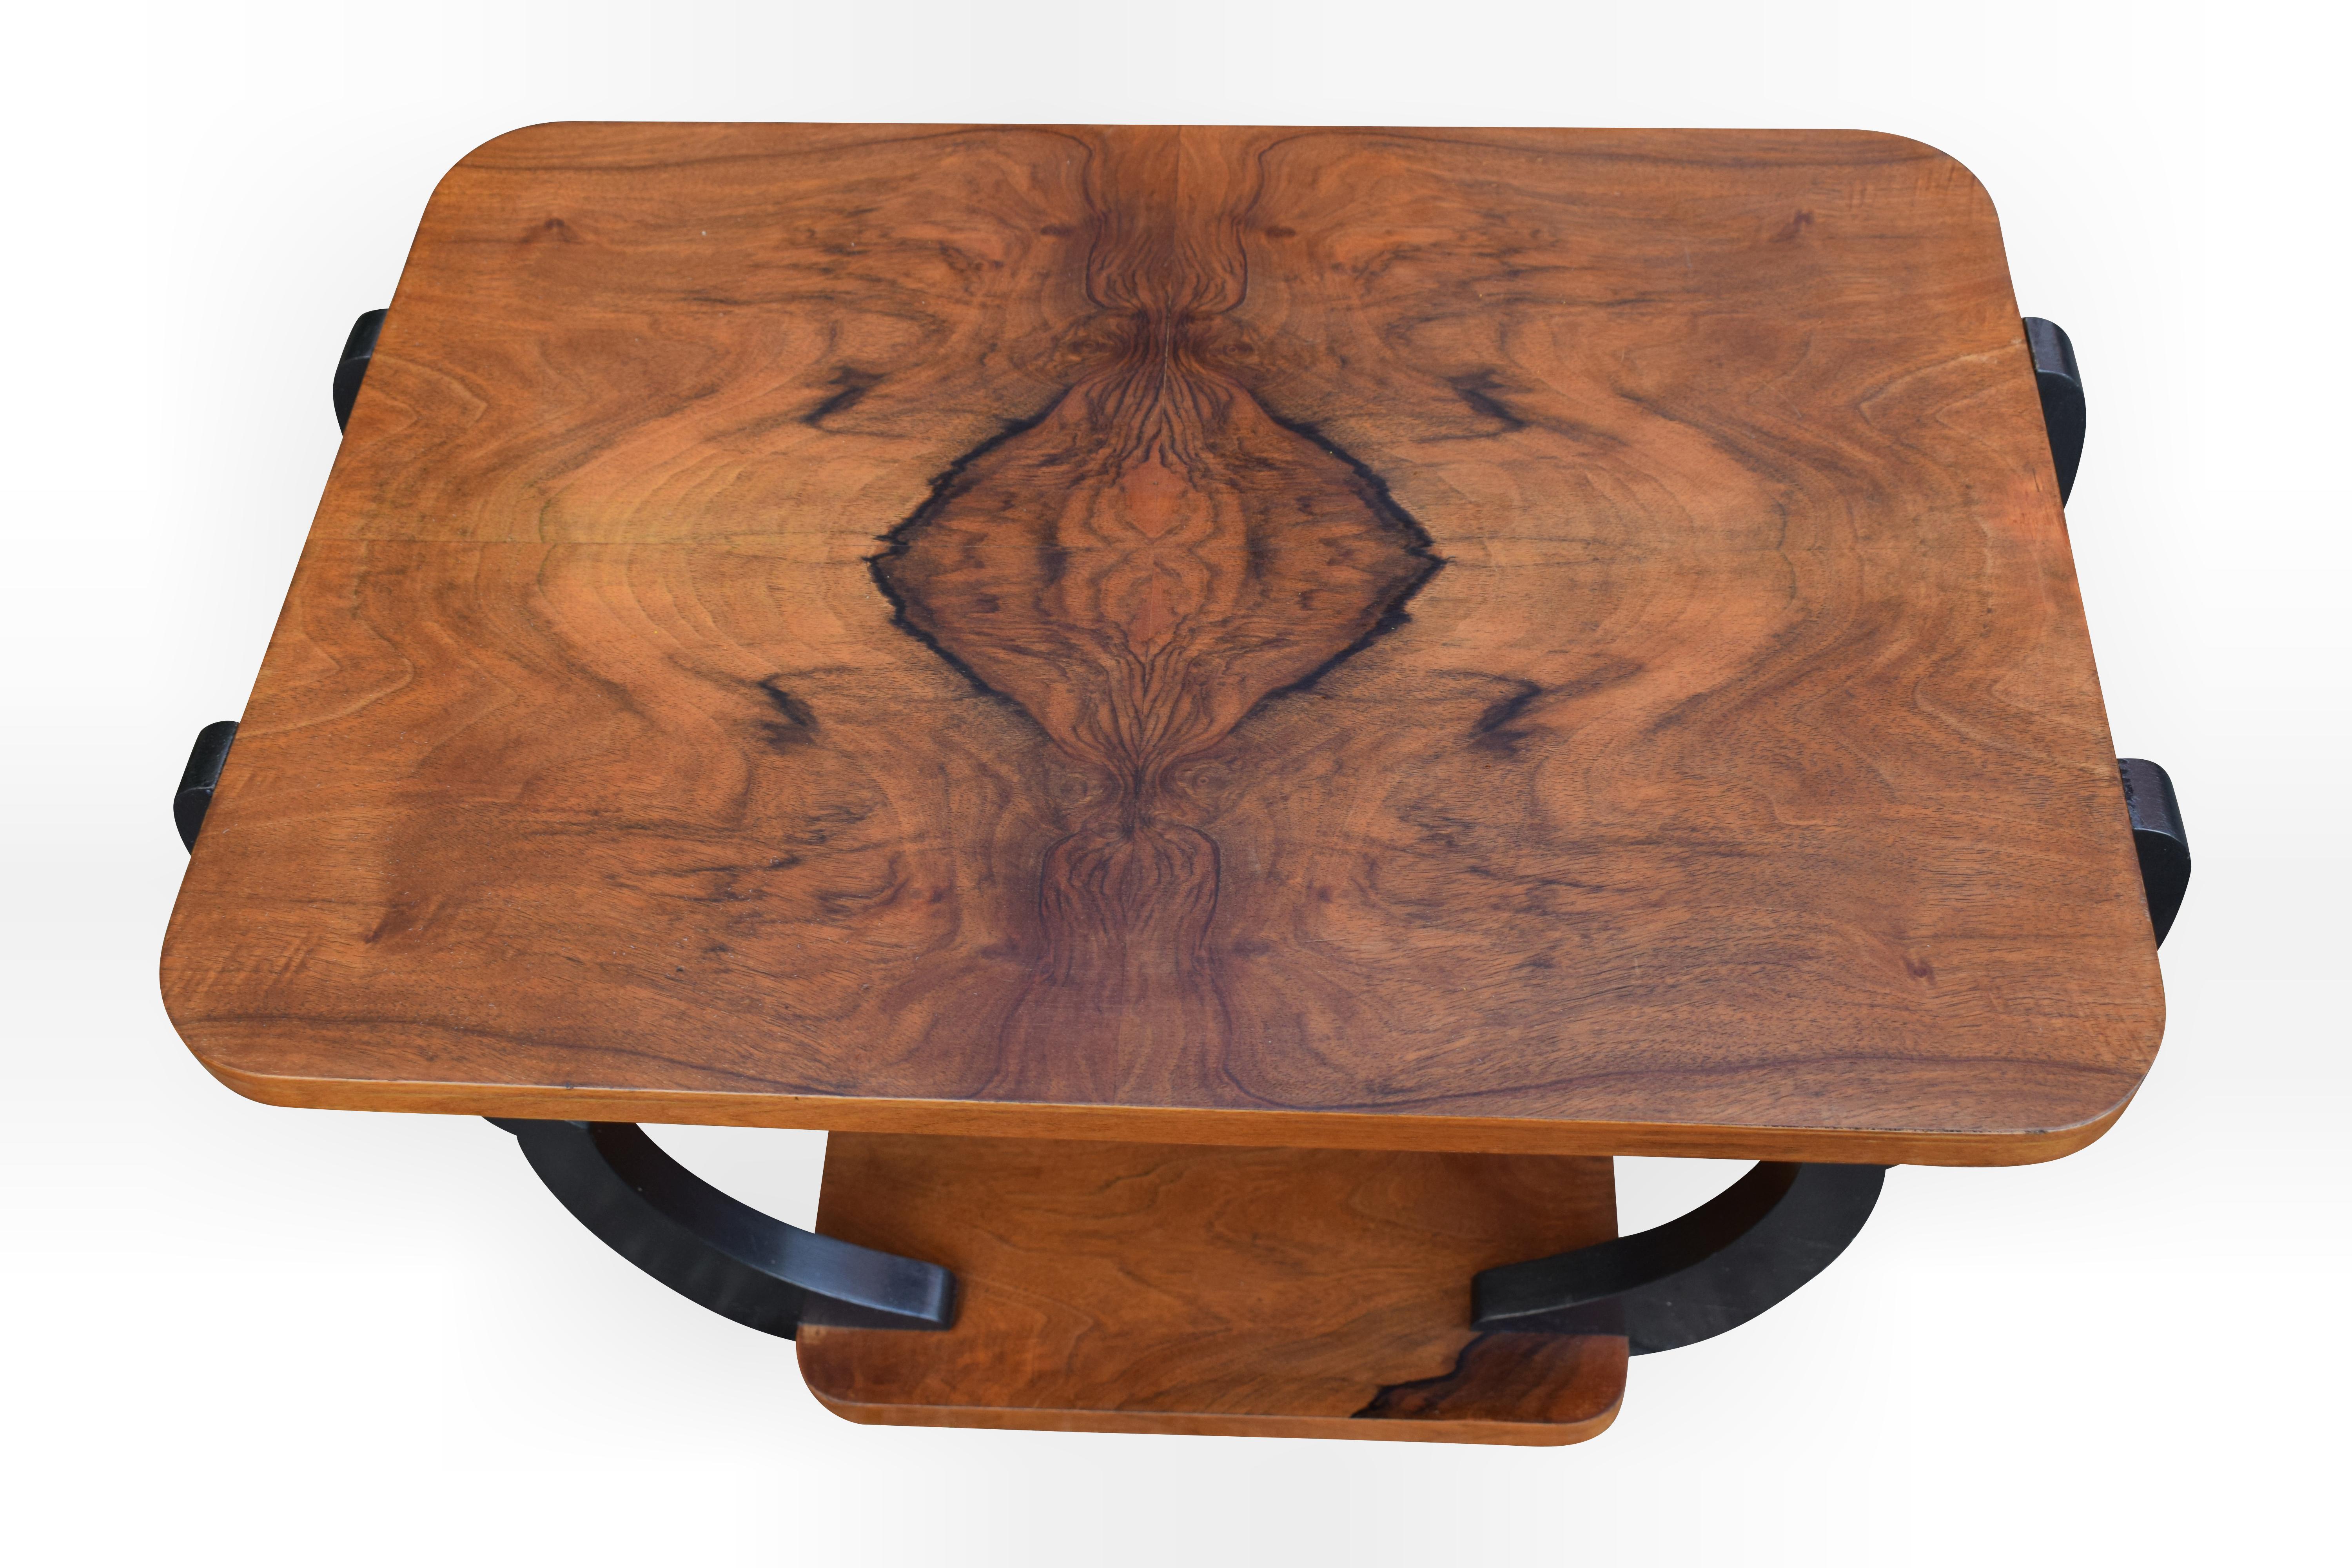 20th Century Two-Tiered Art Deco English Walnut Occasional Table, circa 1930s